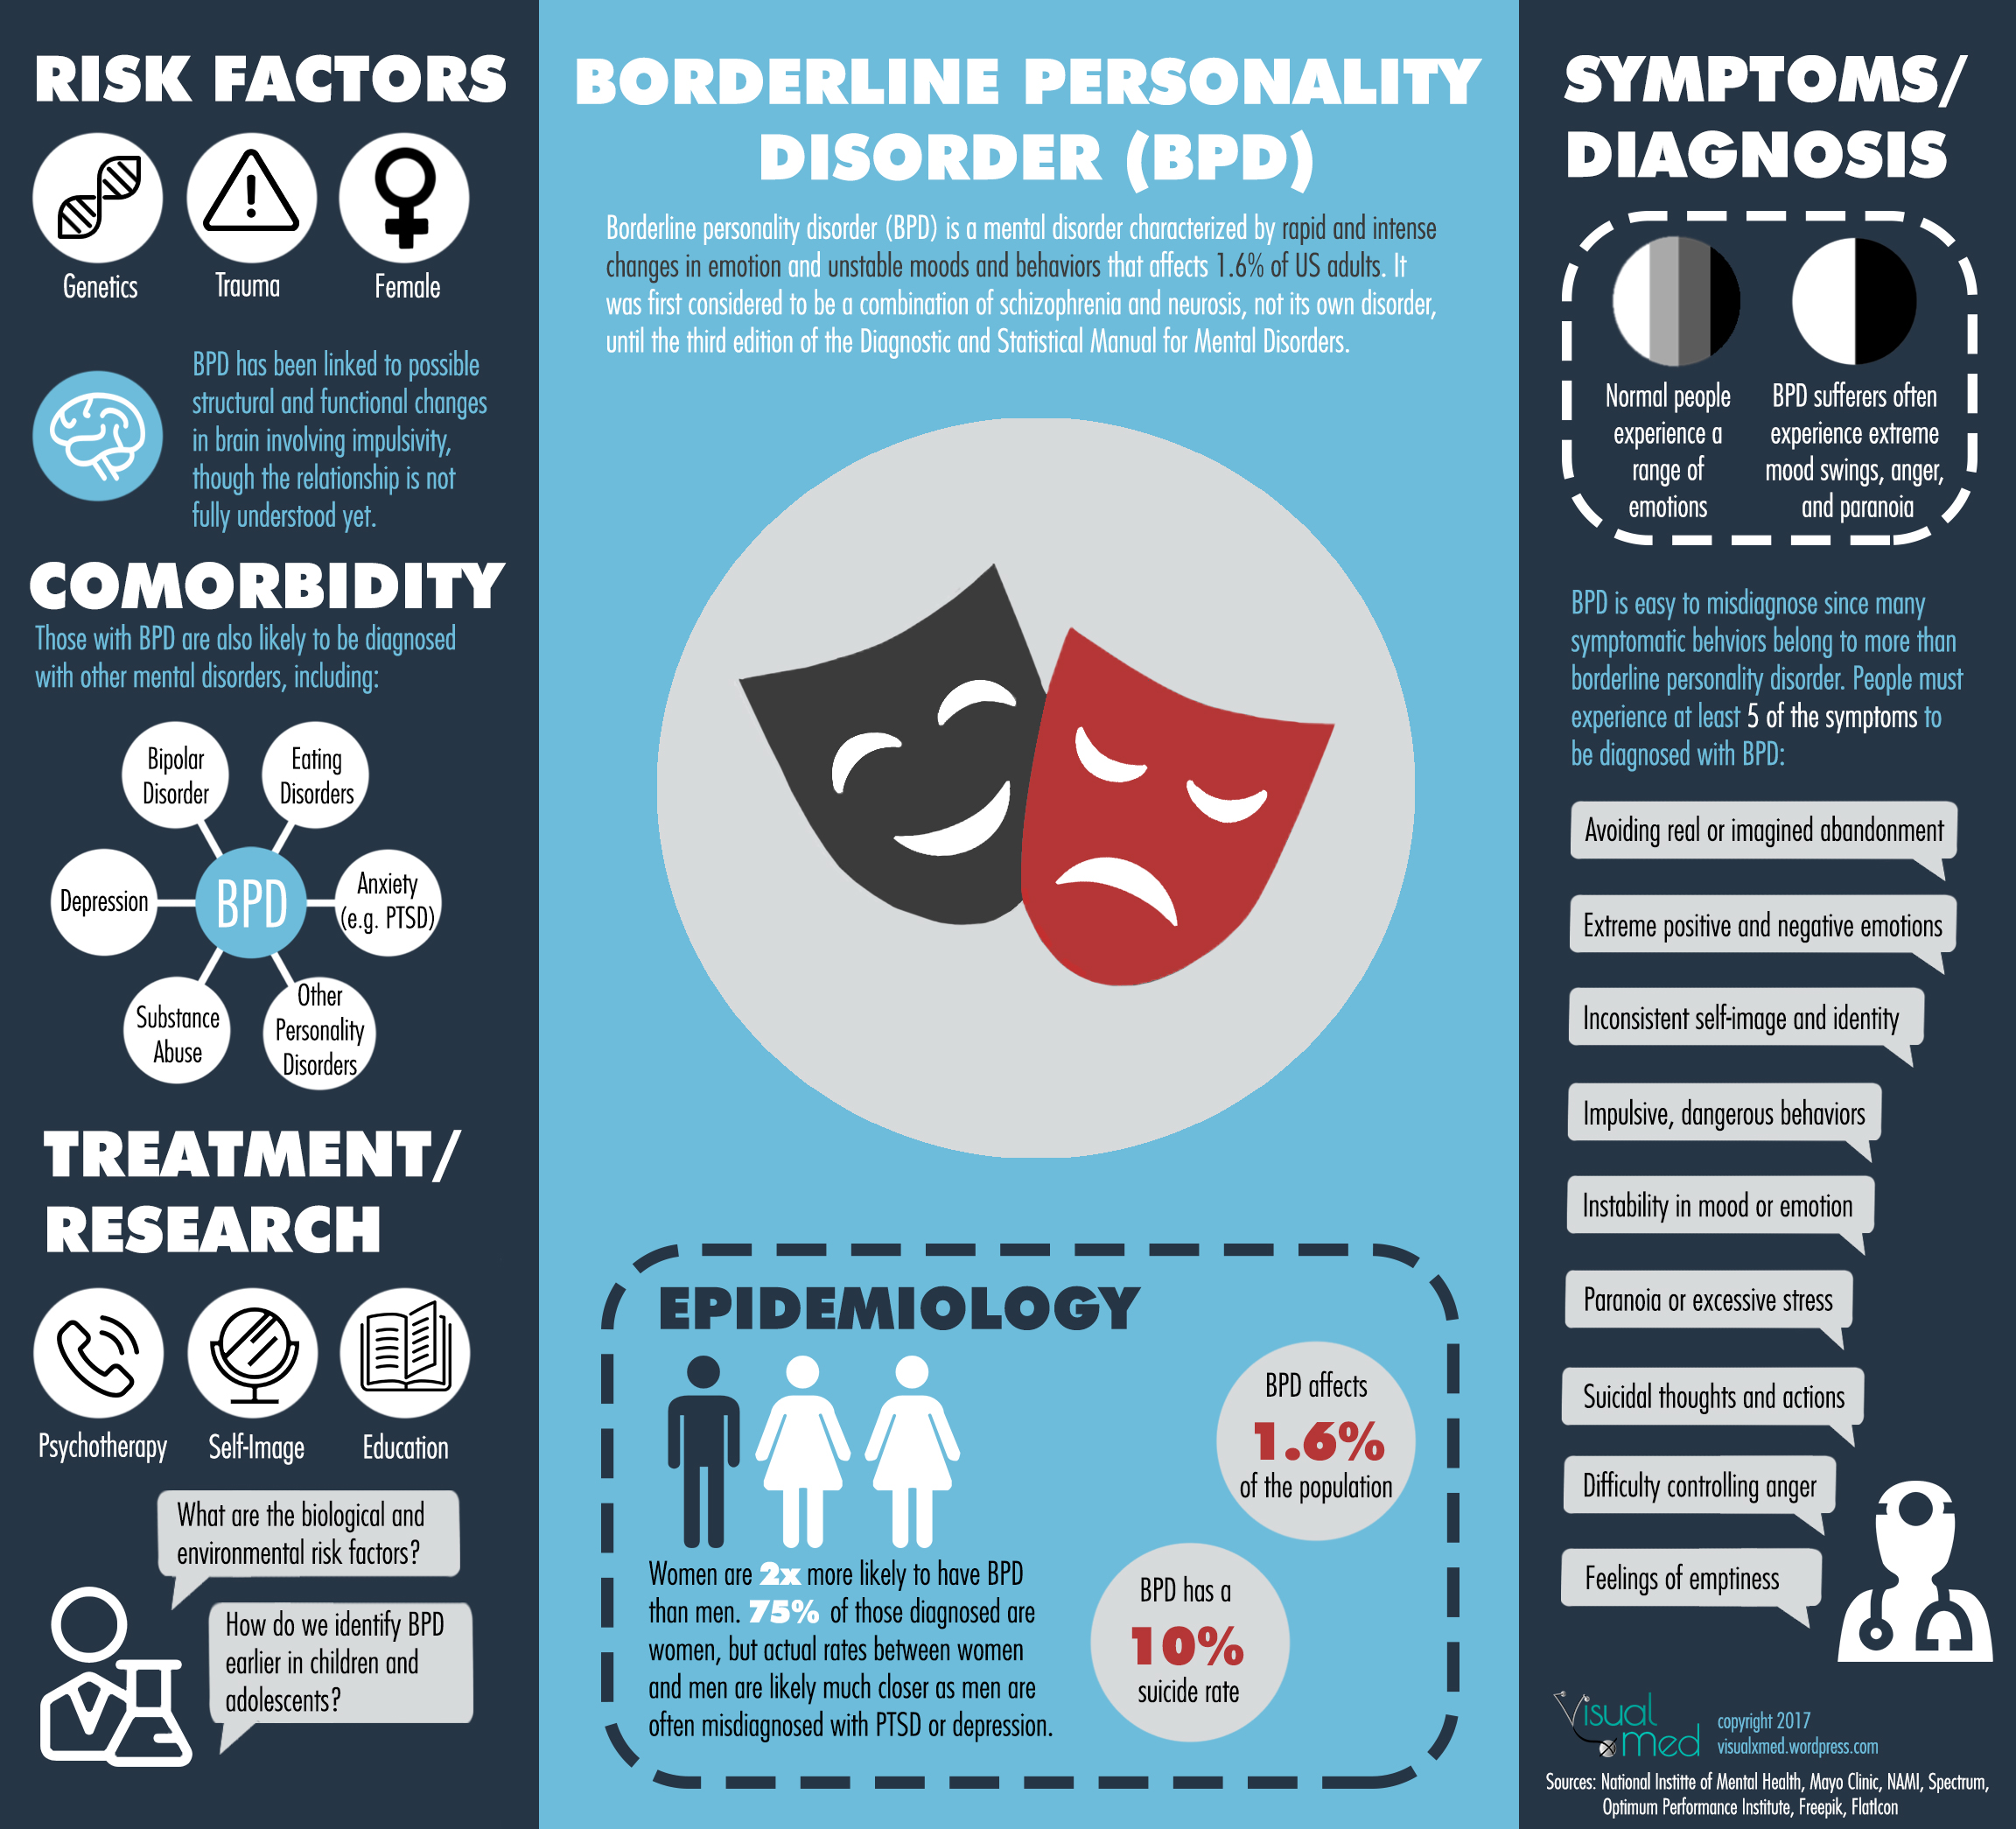 What Is Borderline Personality Disorder (BPD)?